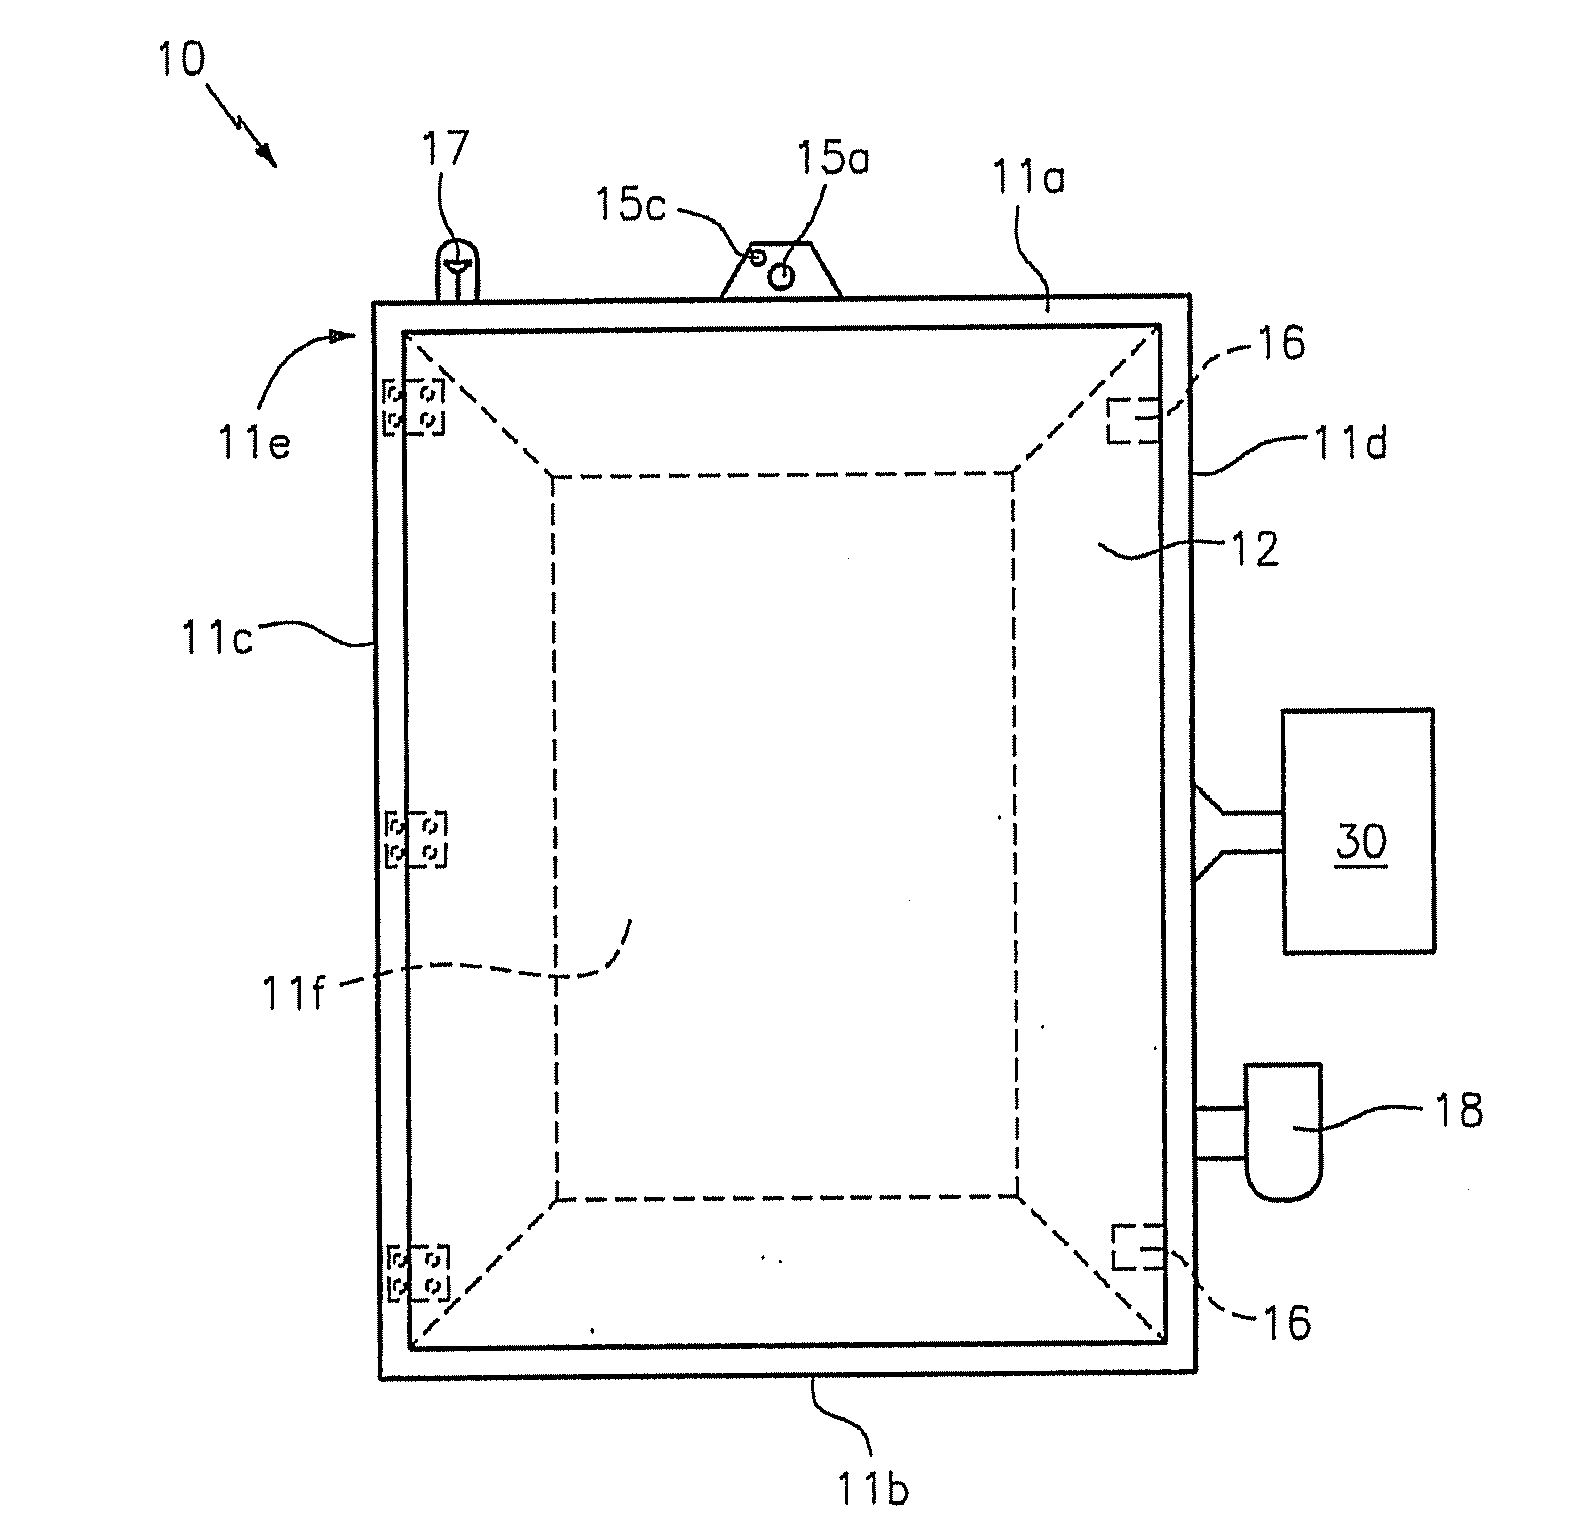 System and method of securely storing, dispensing, and inventorying medications and samples